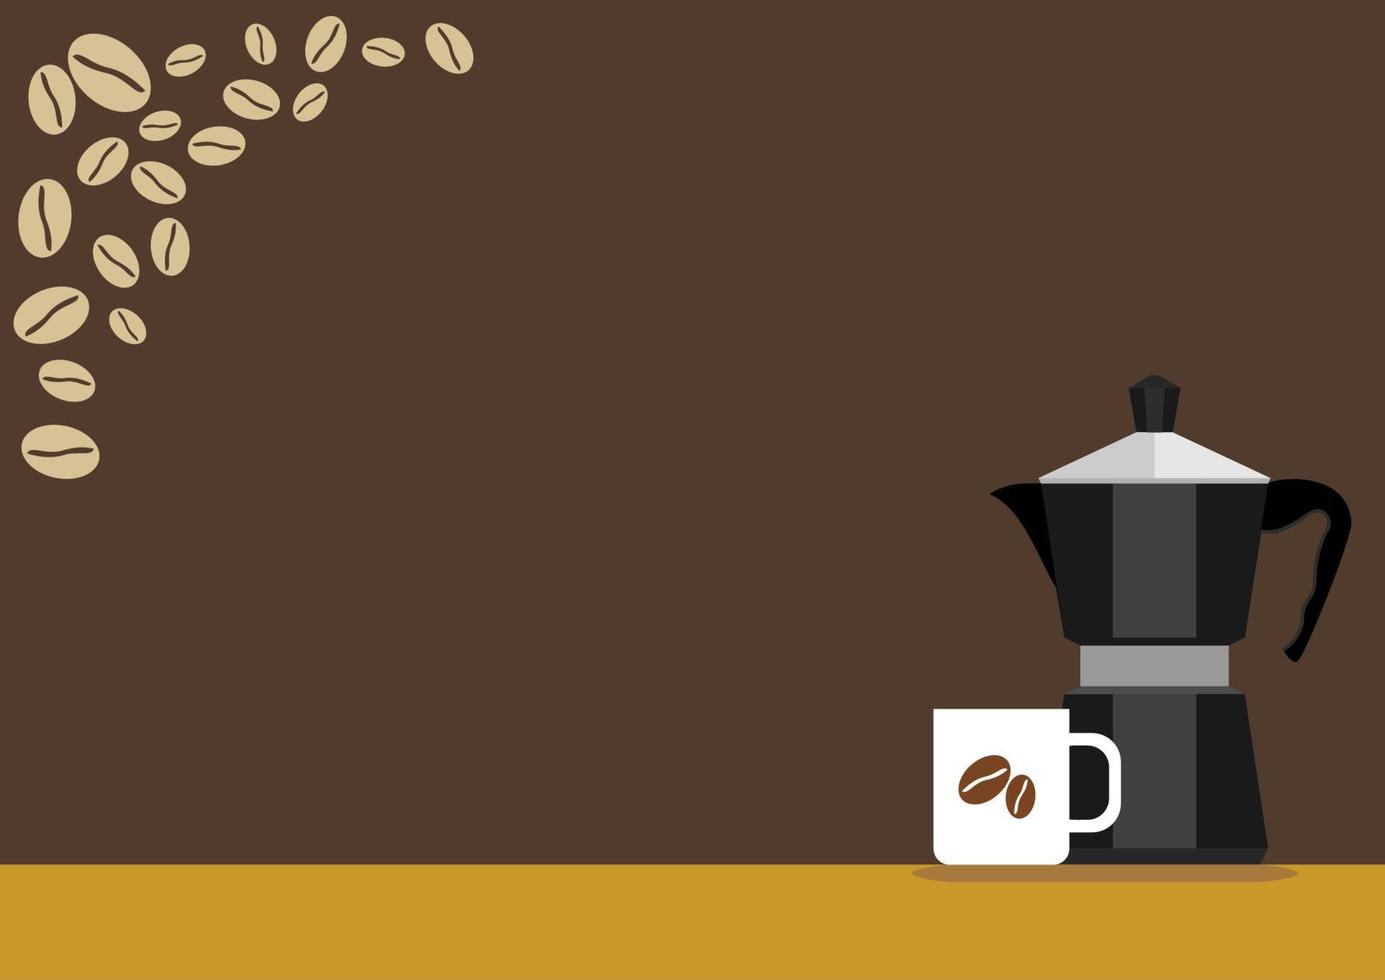 Editable Percolator Coffee Brewing Vector Illustration Text Background, Can be Used for Cafe Advertising